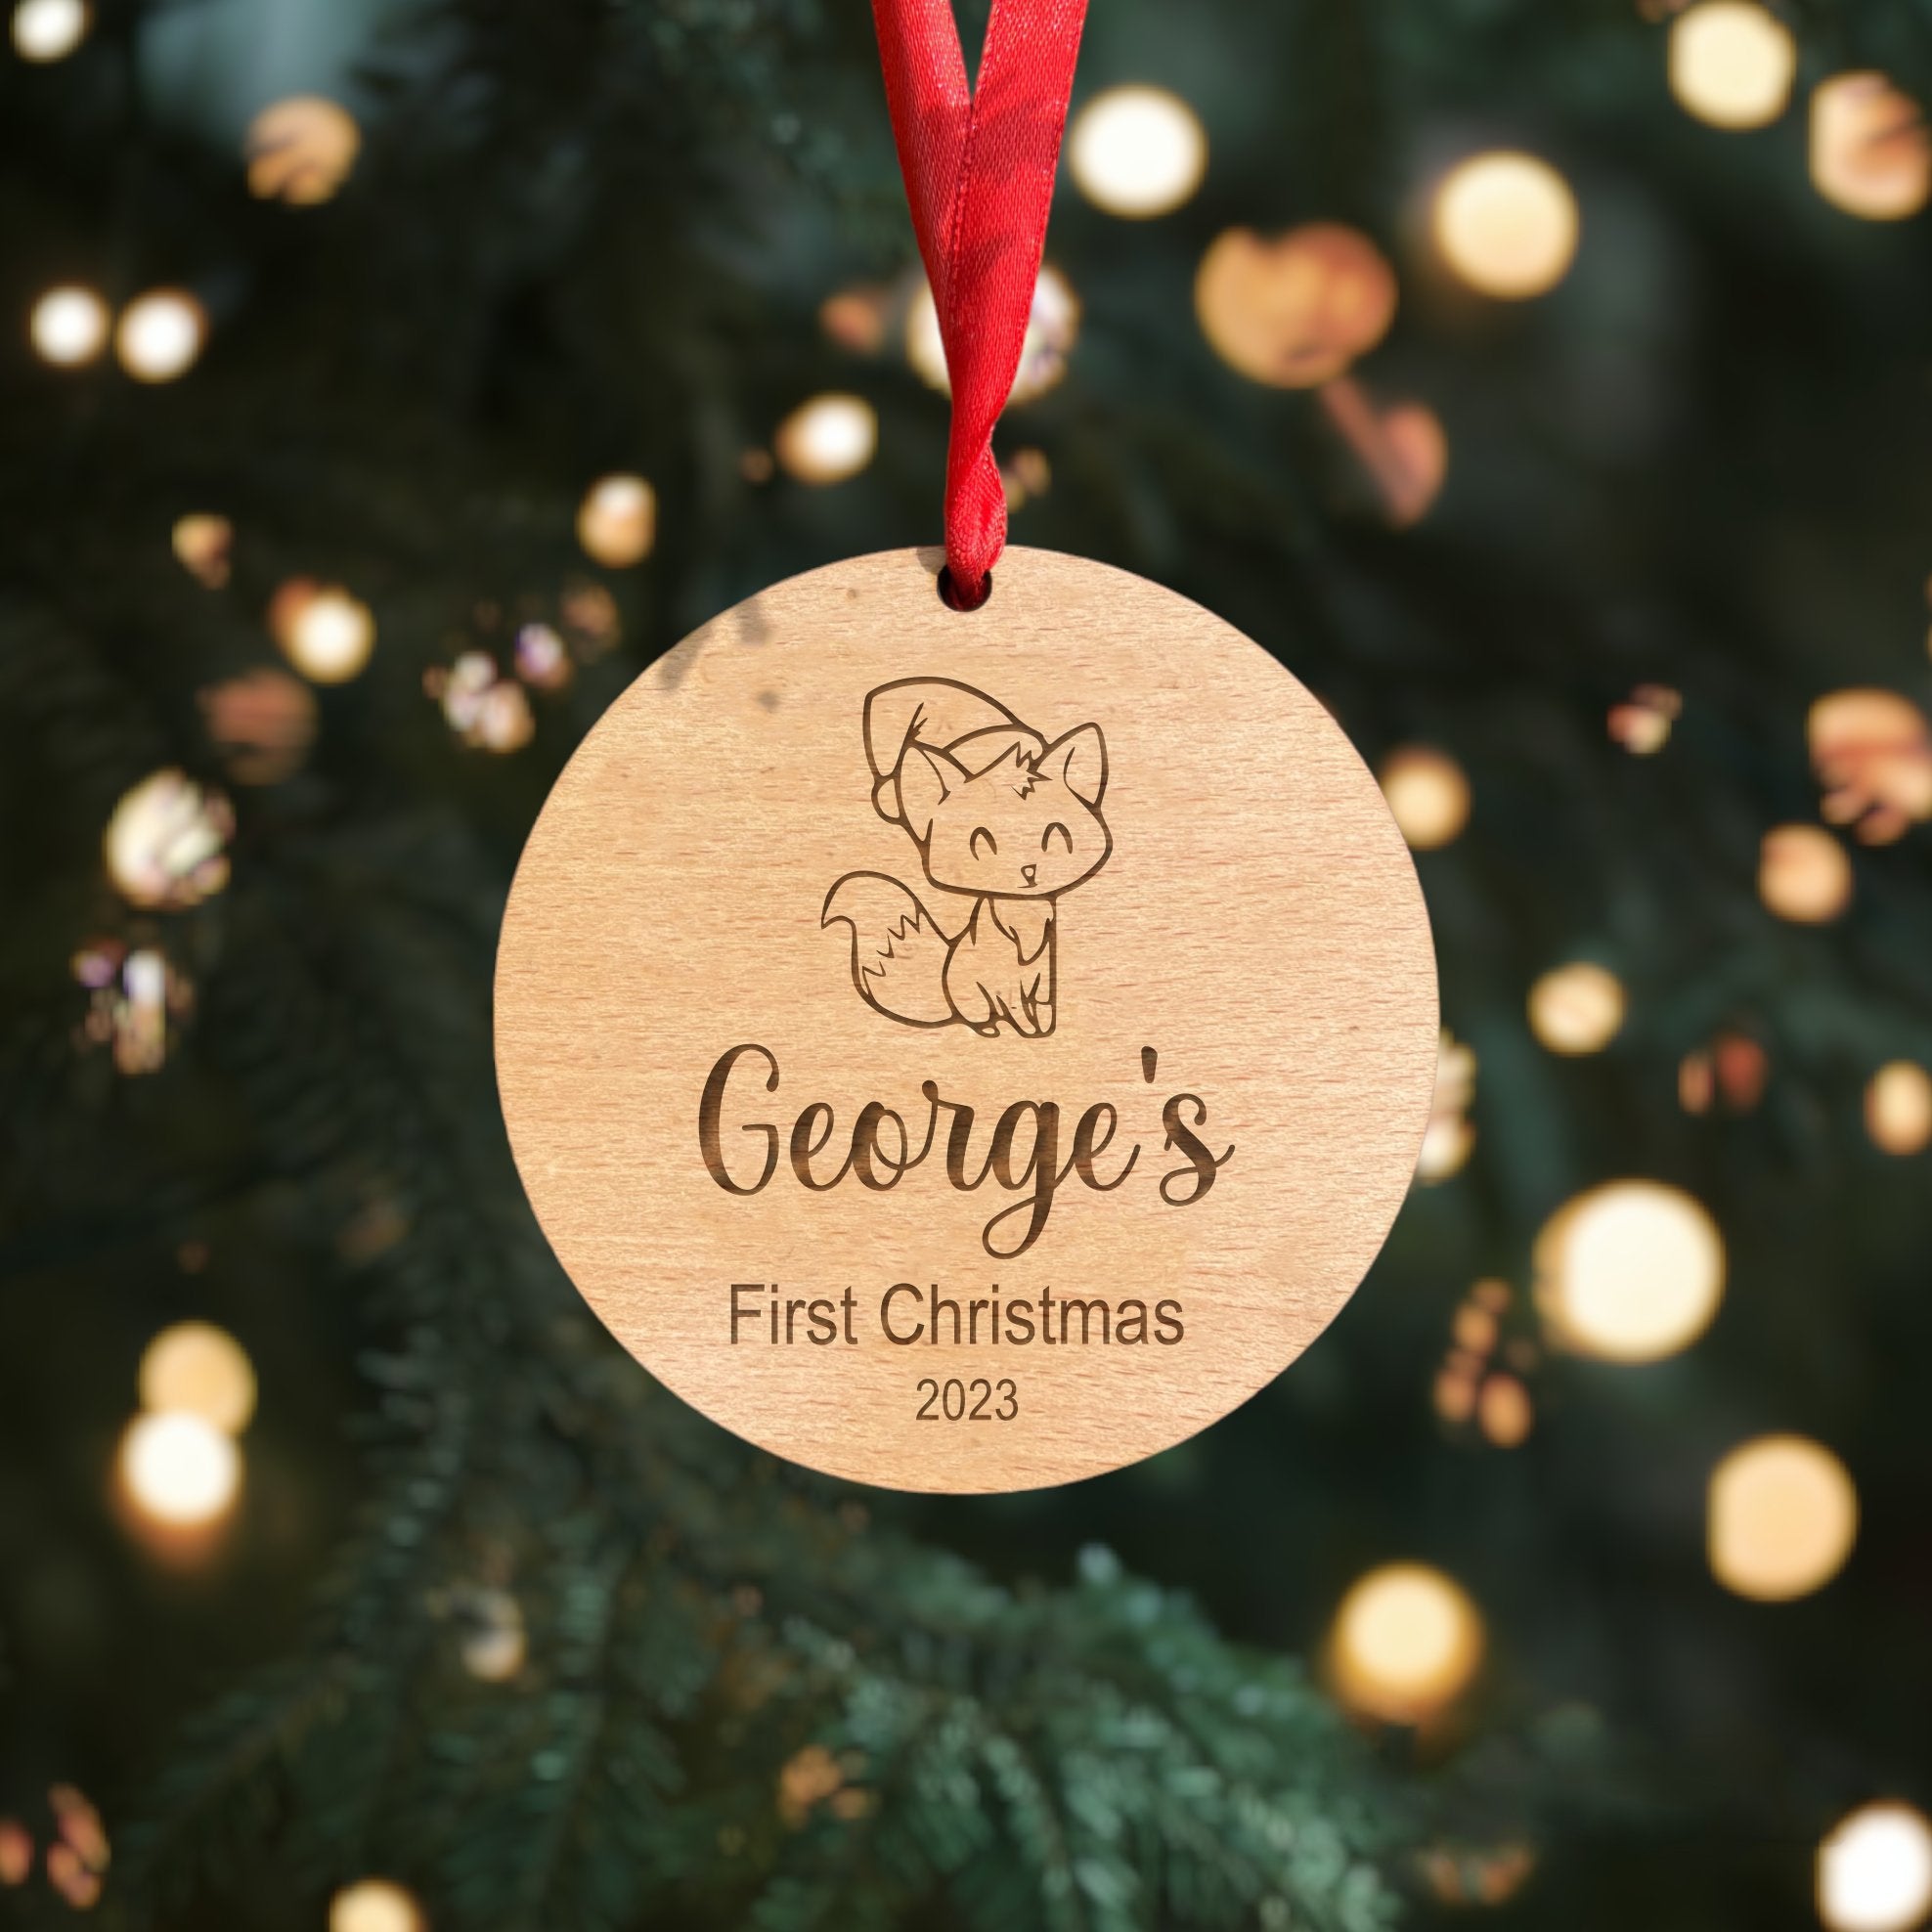 Adorable Fox Design Personalized Baby's First Christmas Bauble - Crafted from Real Beech Veneer Wood, Customized with Your Baby's Name and This Year's Date. Add a Touch of Whimsy to Your Baby's First Holiday Season.